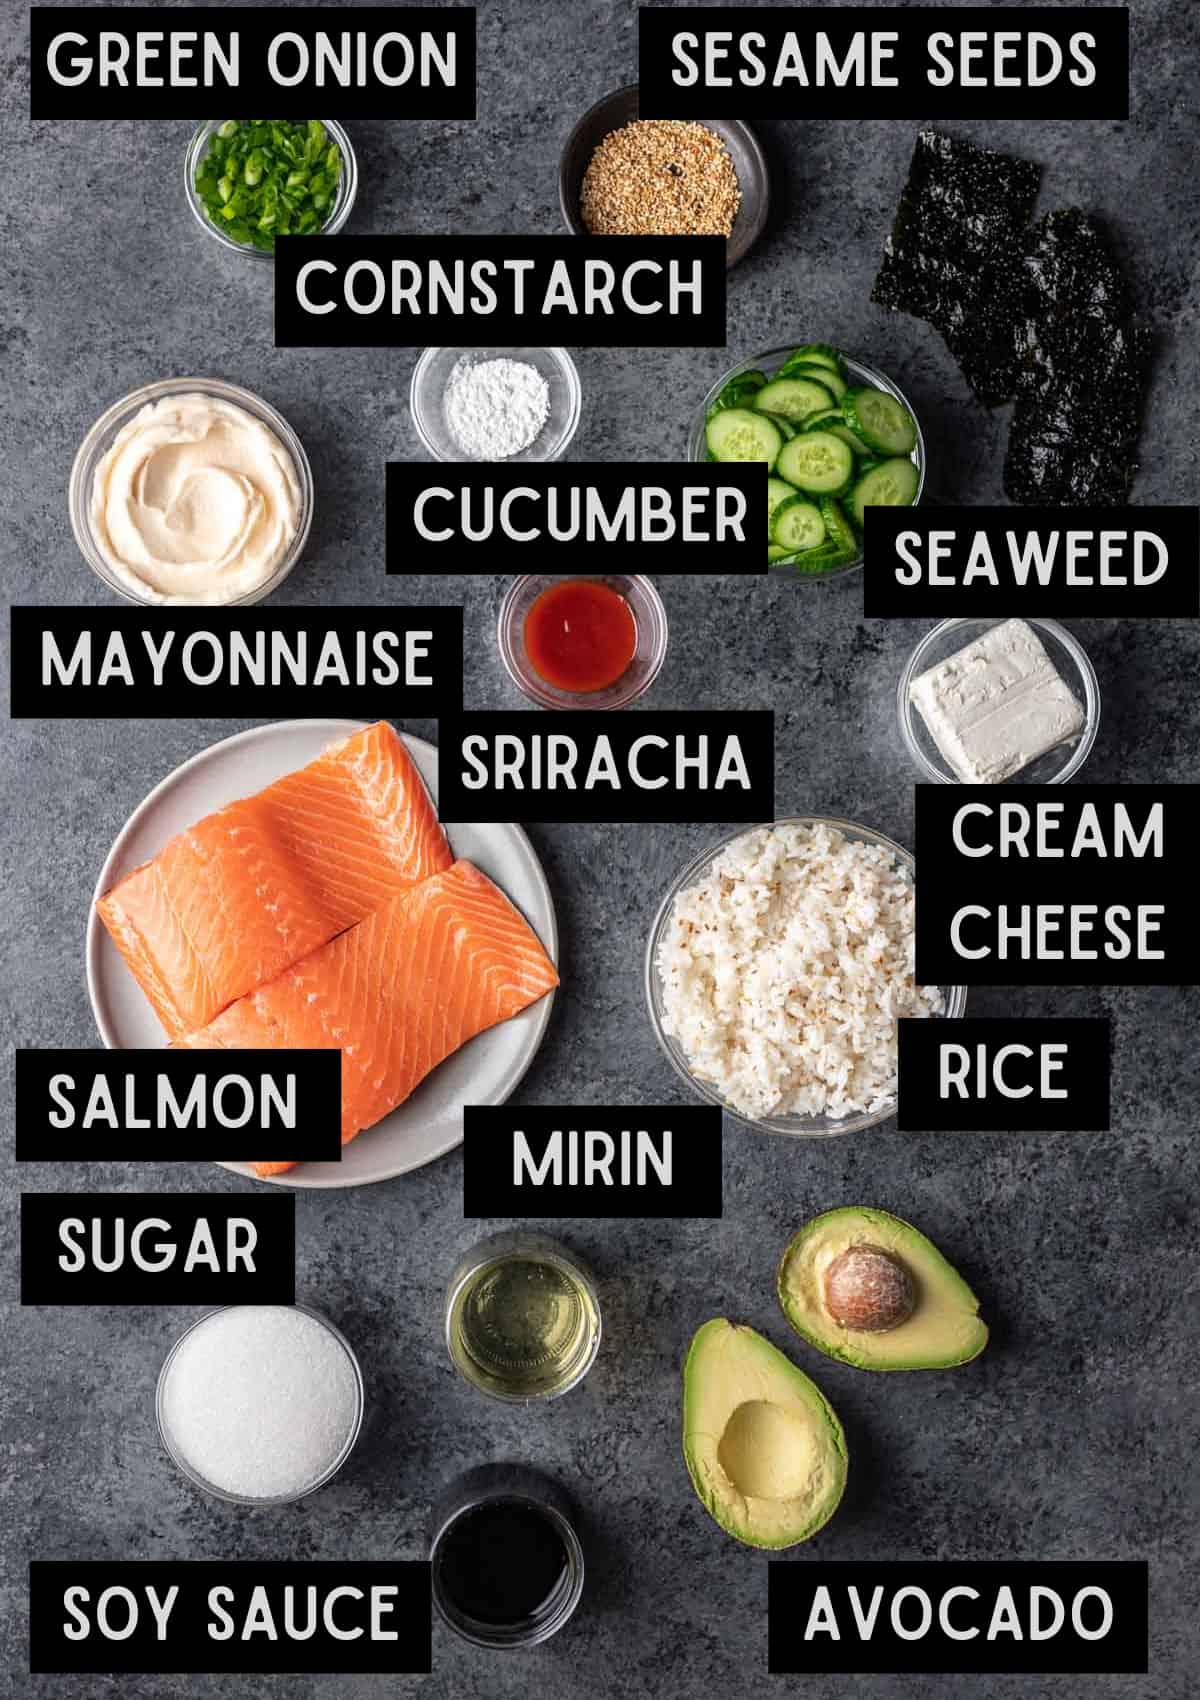 Labelled ingredients for salmon sushi bake (see recipe for details).